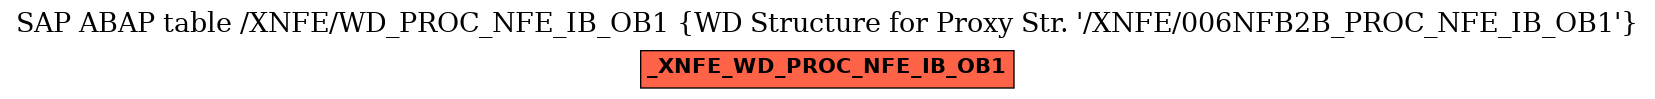 E-R Diagram for table /XNFE/WD_PROC_NFE_IB_OB1 (WD Structure for Proxy Str. 